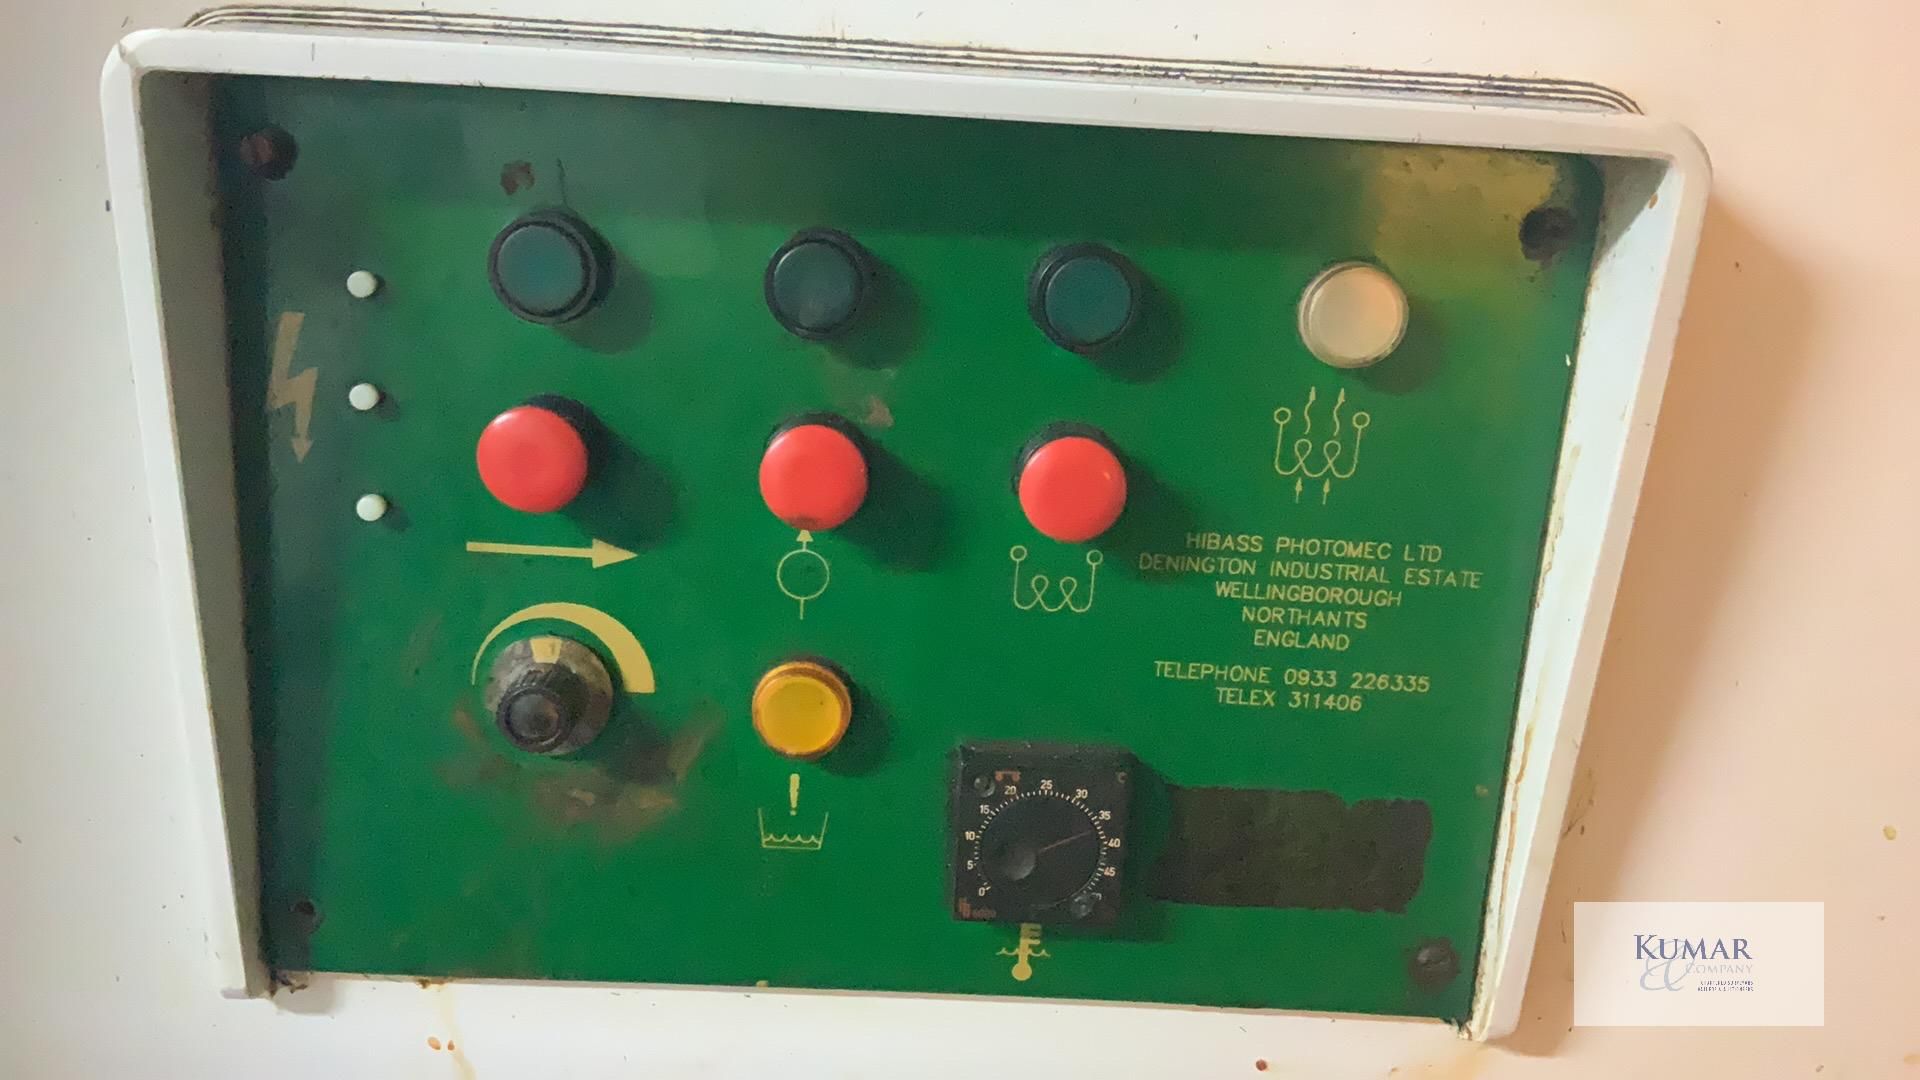 Hi Bass Moduline Series II 600 Developer - Please Note This Item Will Require Decommissioning and - Image 2 of 6